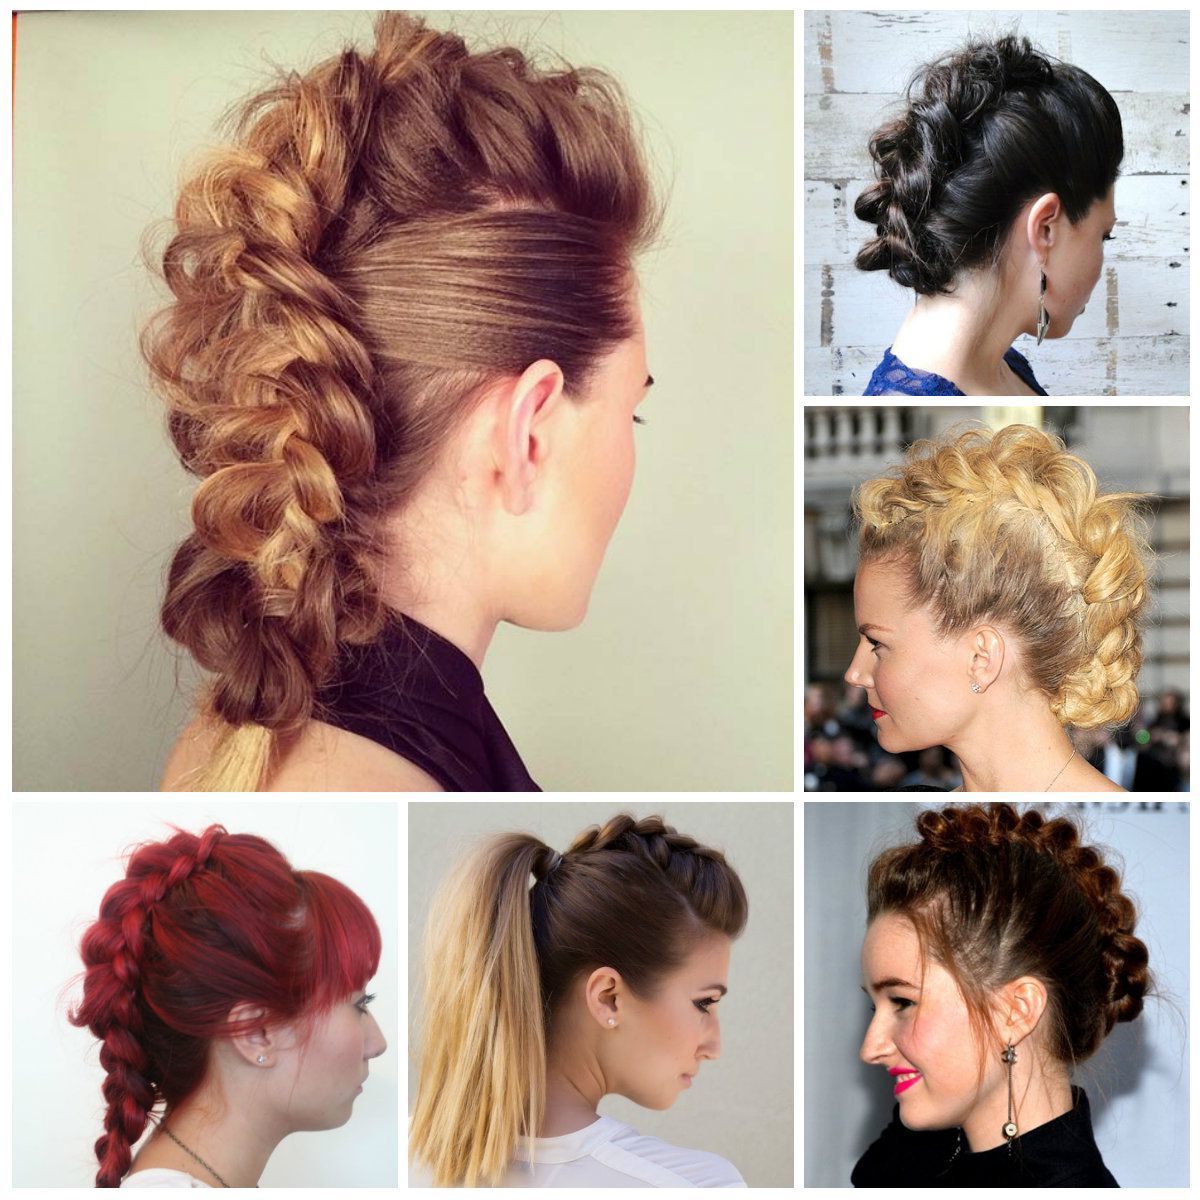 Haircuts, Hairstyles 2016 And Inside Fashionable Retro Pop Can Updo Faux Hawk Hairstyles (View 19 of 20)